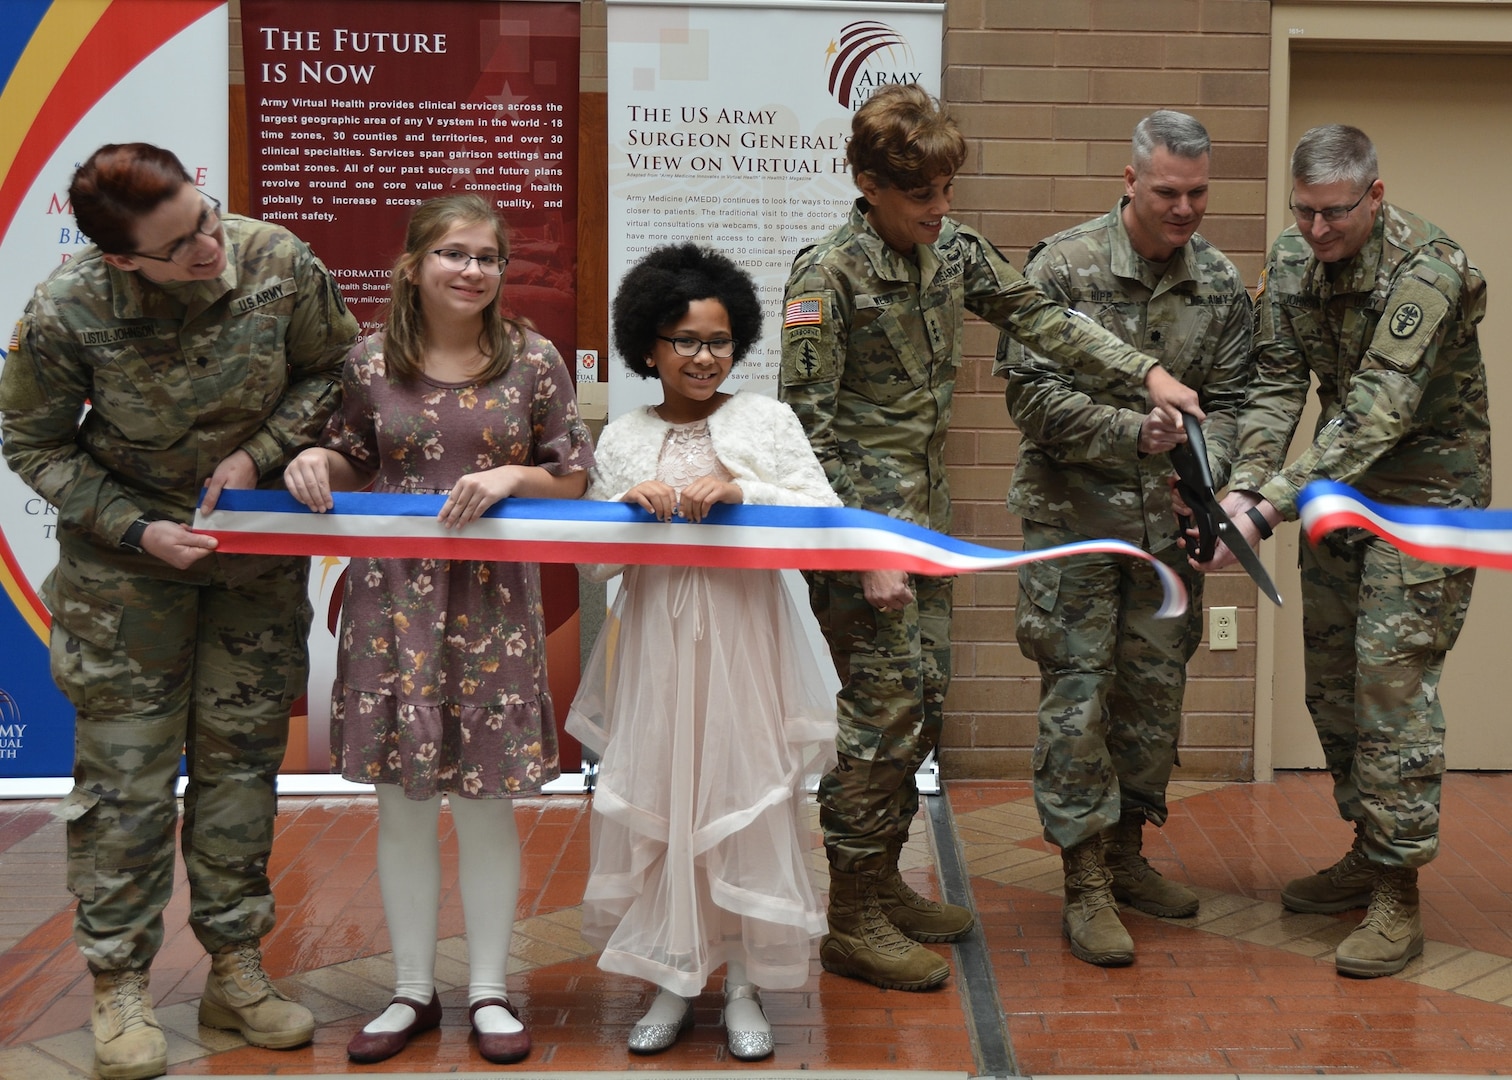 (From left) Lt. Gen. Nadja West, Armyhe Surgeon General and commanding general , U.S. Army Medical Command; Brig. Gen. Jeffrey Johnson, Brooke Army Medical Center commanding general, Lt. Col. Sean Hipp, director of the Army Virtual Medical Center, and children from Fort Sam Houston Elementary School cut the ribbon during the Army Virtual Health Kickoff ceremony Jan. 4.